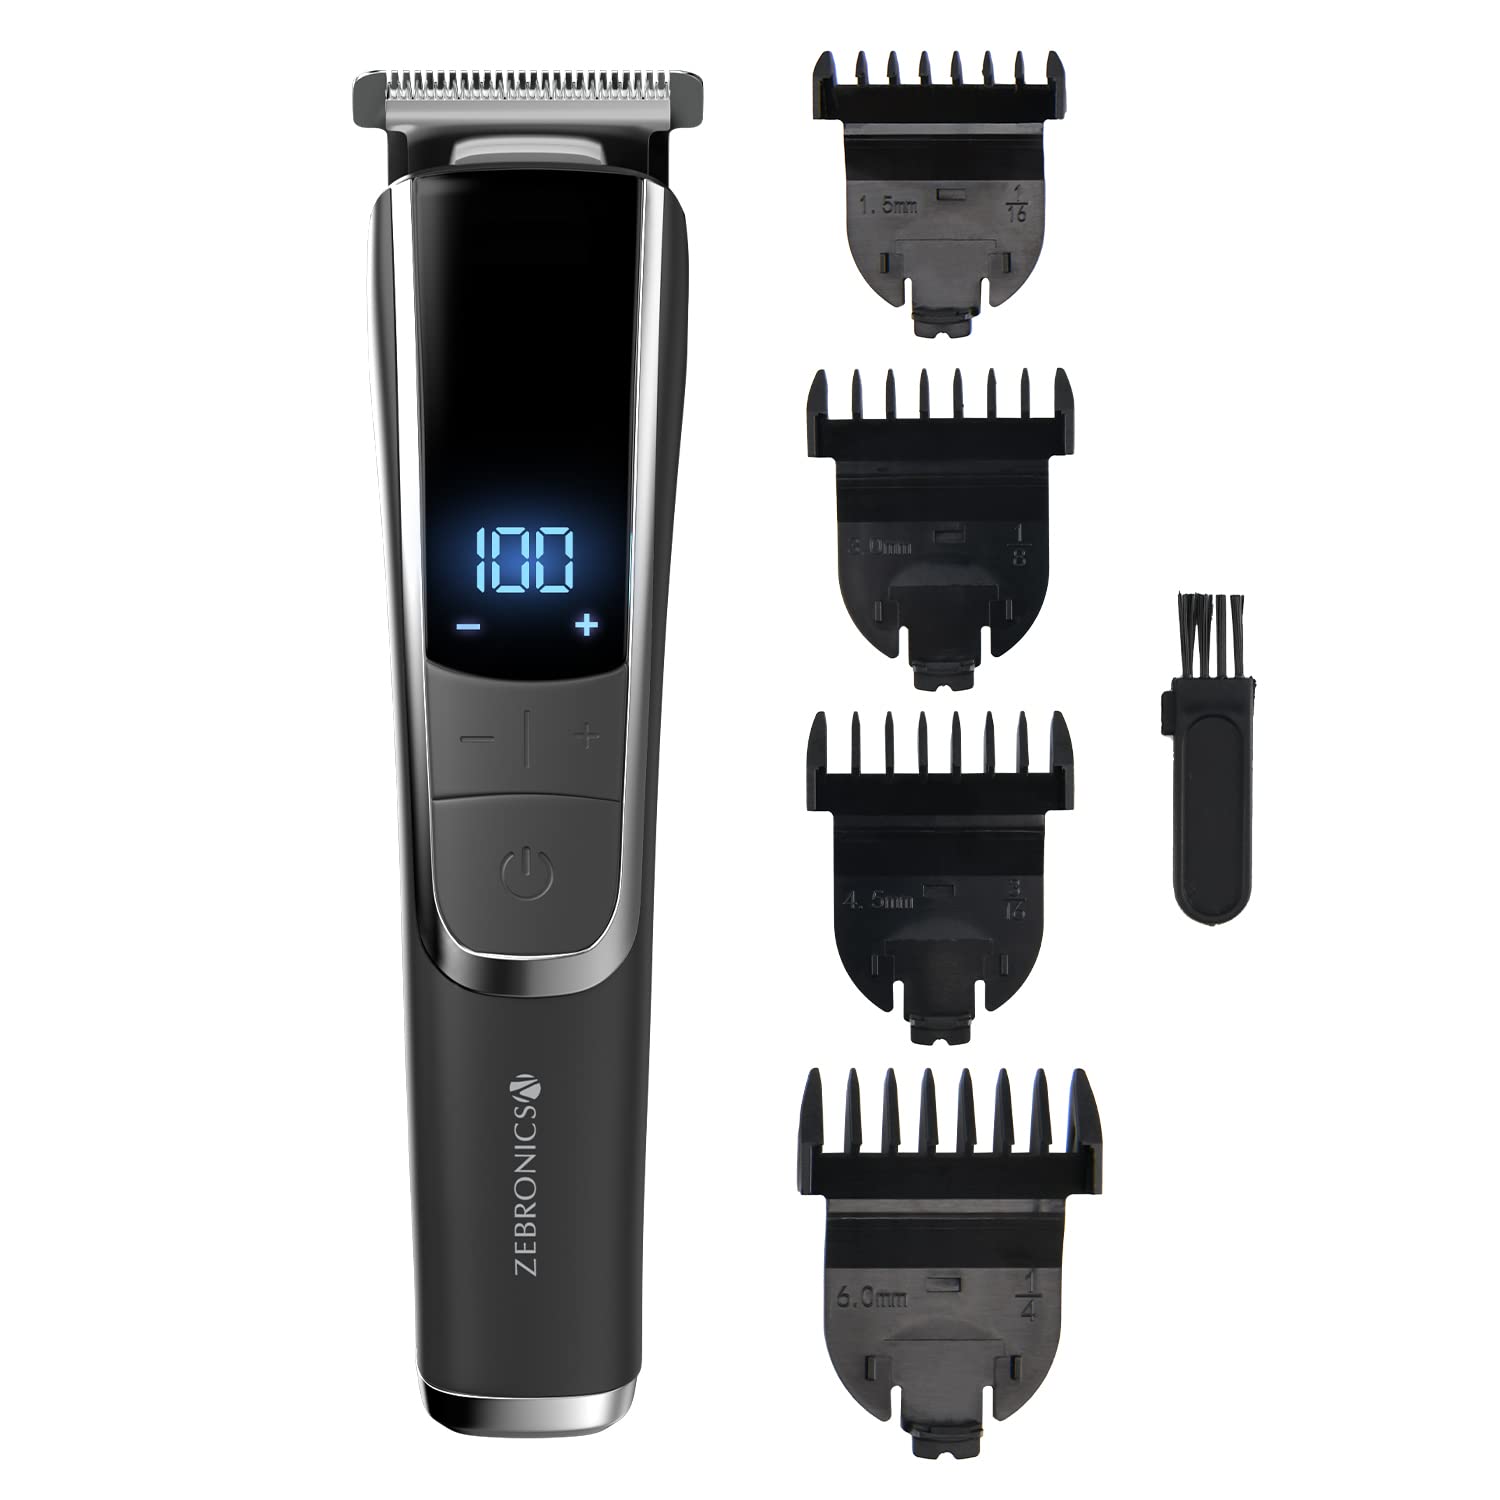 Zebronics ZEB-HT102 Cordless/Cord use Trimmer with up to 120mins backup, USB fast charge, LED display, 3 speed modes, Rounded tip stainless steel blade, 4 guide combs, Washable attachments and ABS(Black)-Trimmer-dealsplant